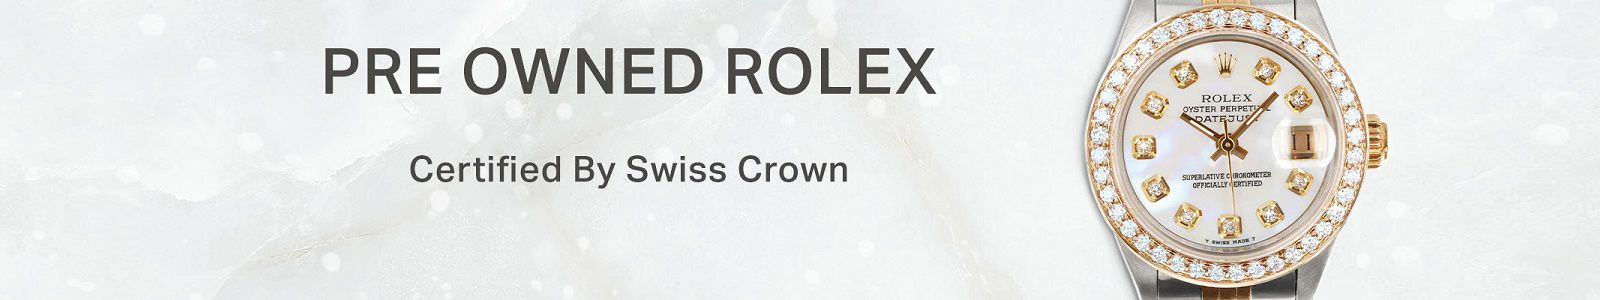 Pre Owned Rolex, Certified by Swiss Crown